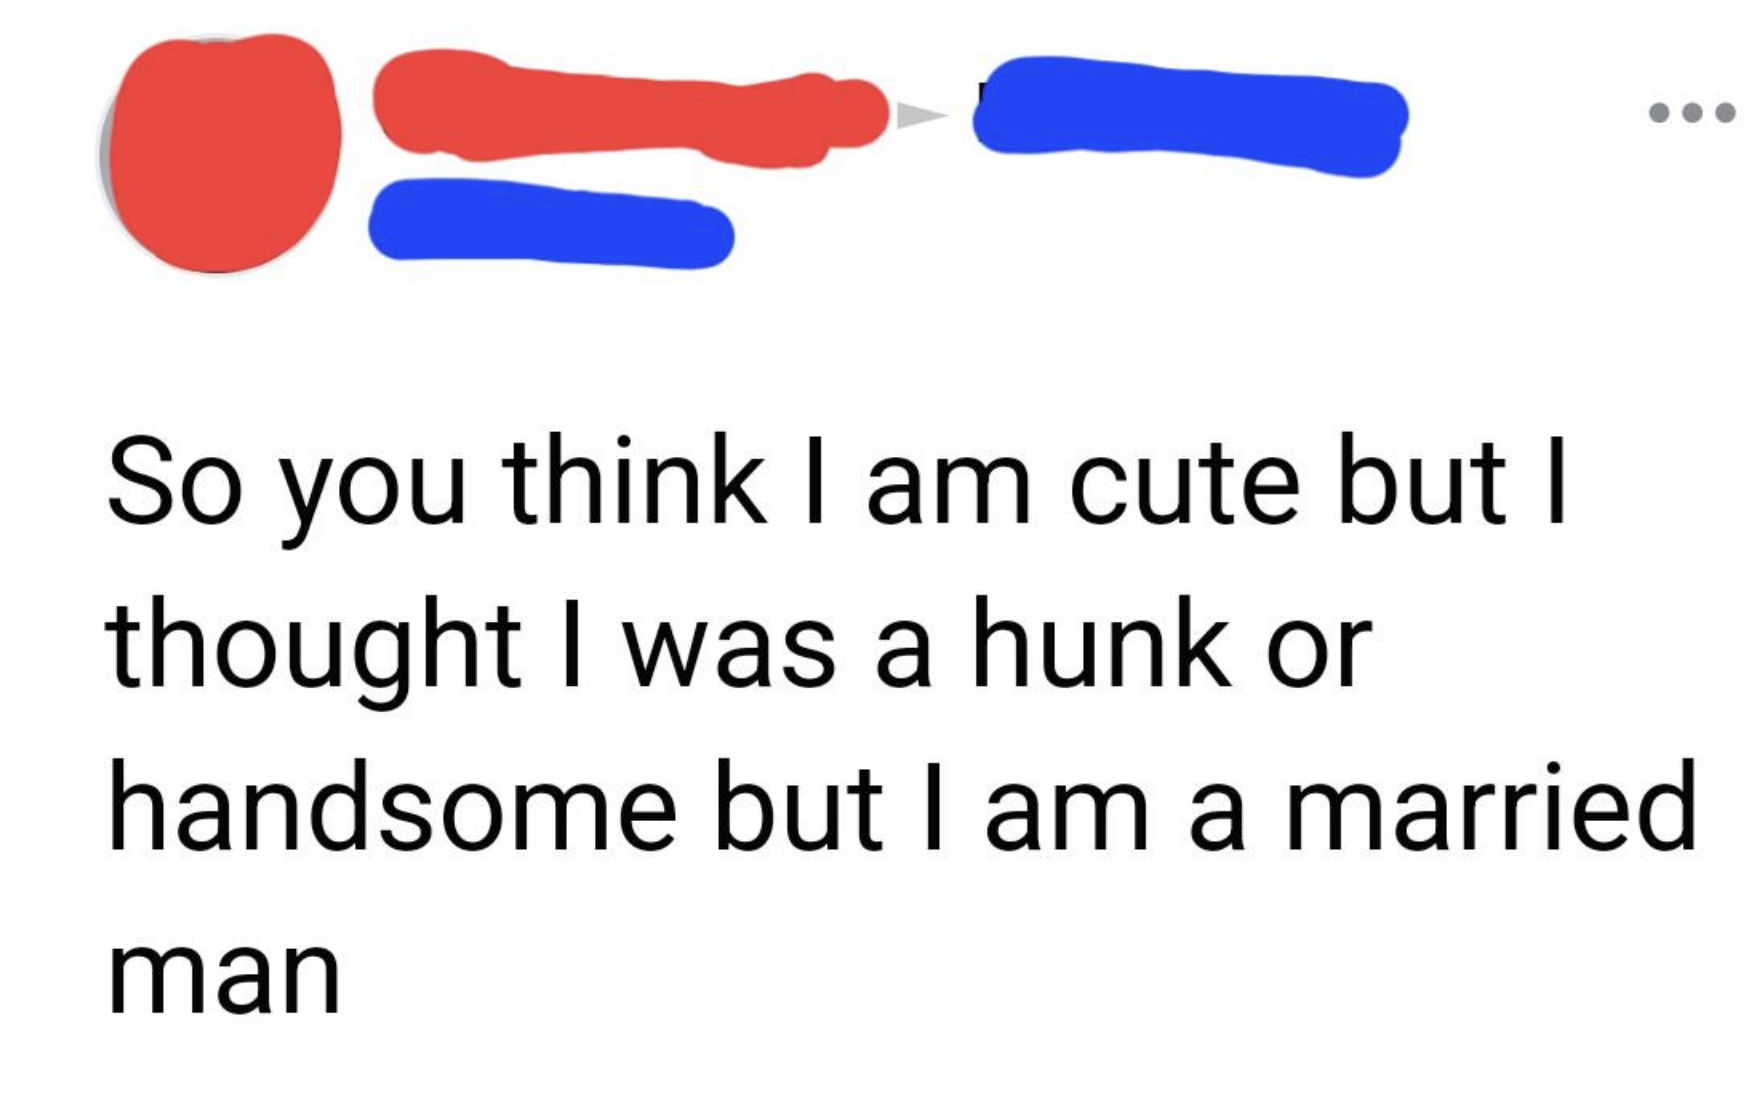 &quot;So you think I am cute but I thought I was a hunk or handsome but I am a married man&quot;